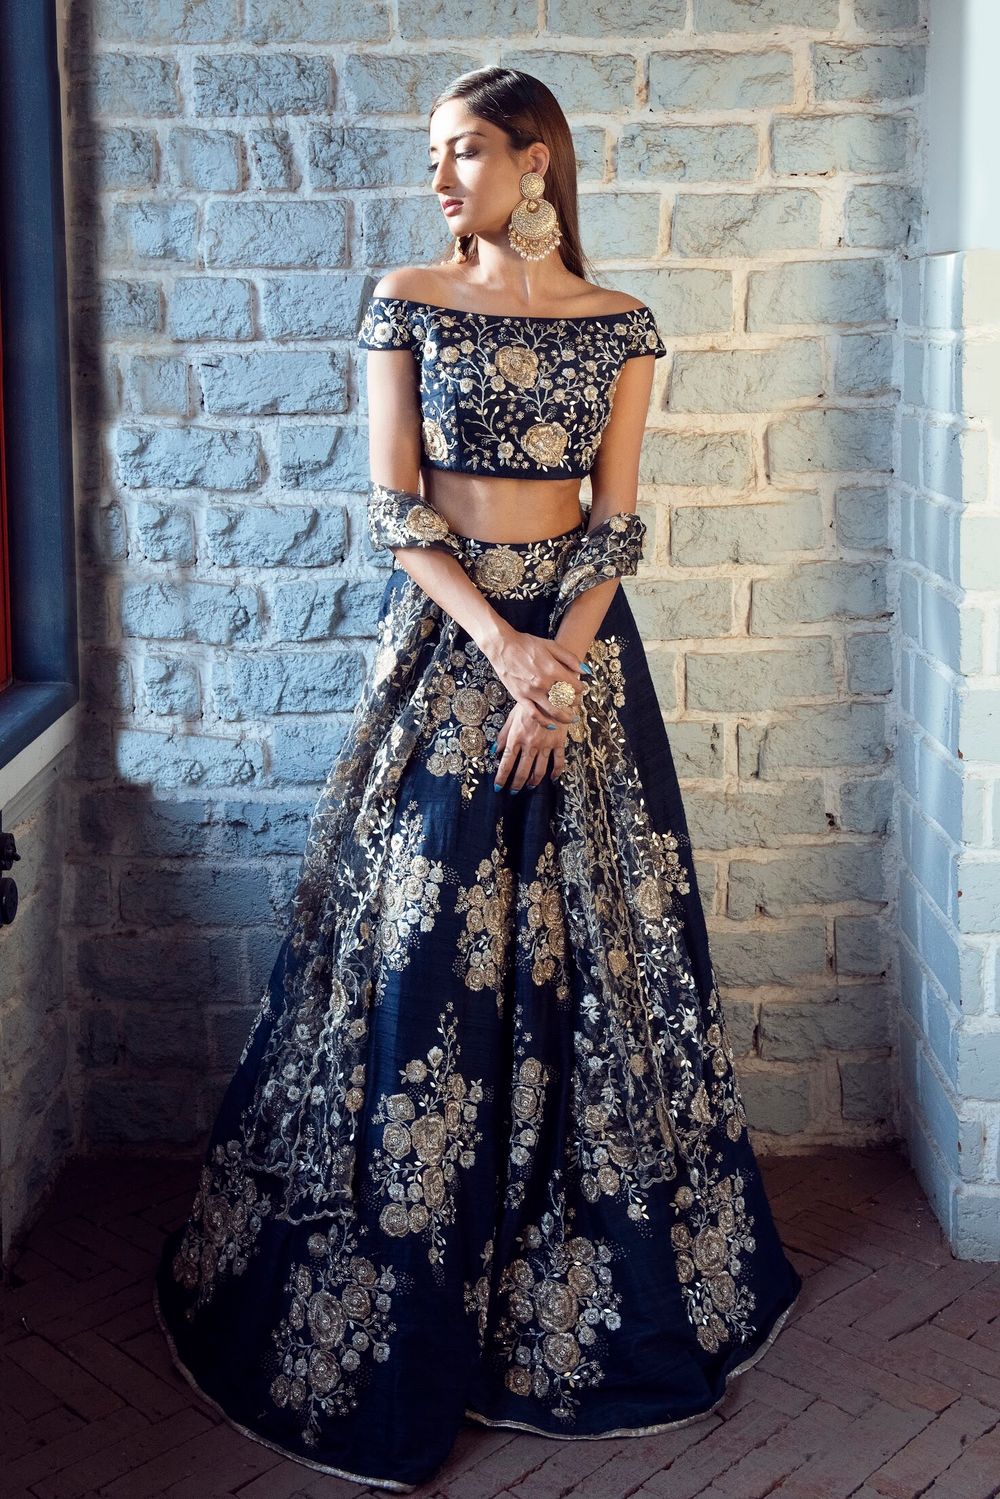 Photo of An off-shoulder engagement lehenga coupled with heavy earrings.